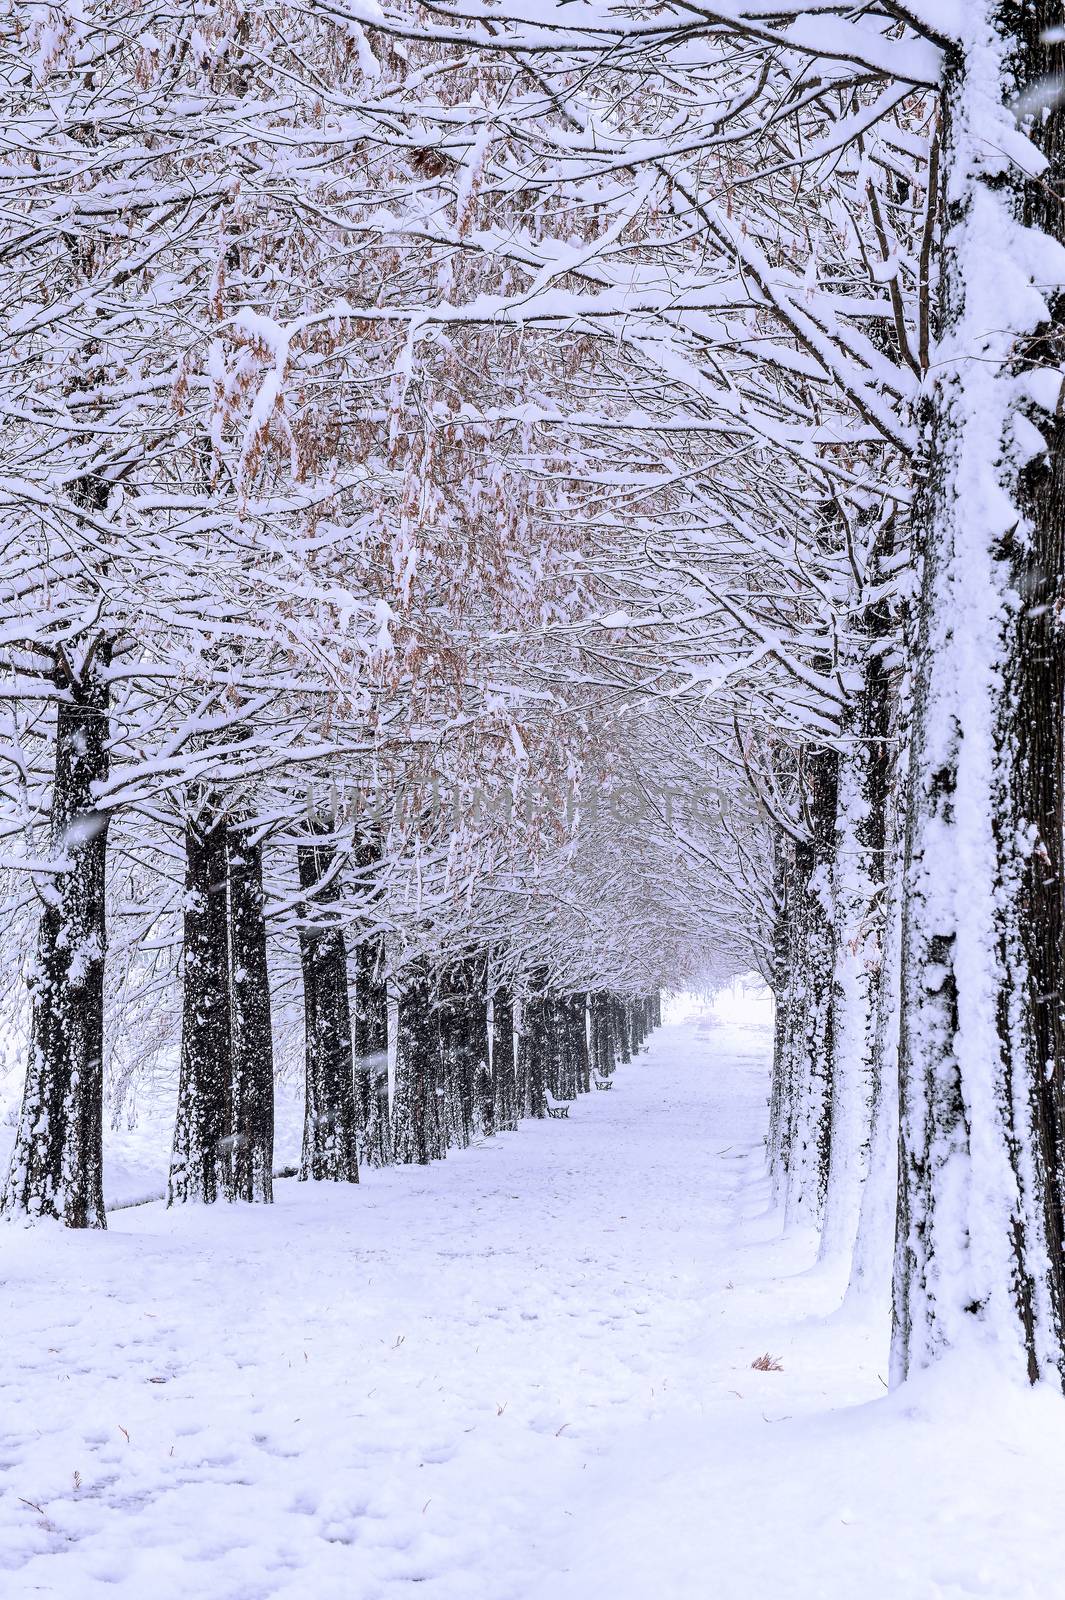 Row of trees in Winter with falling snow.